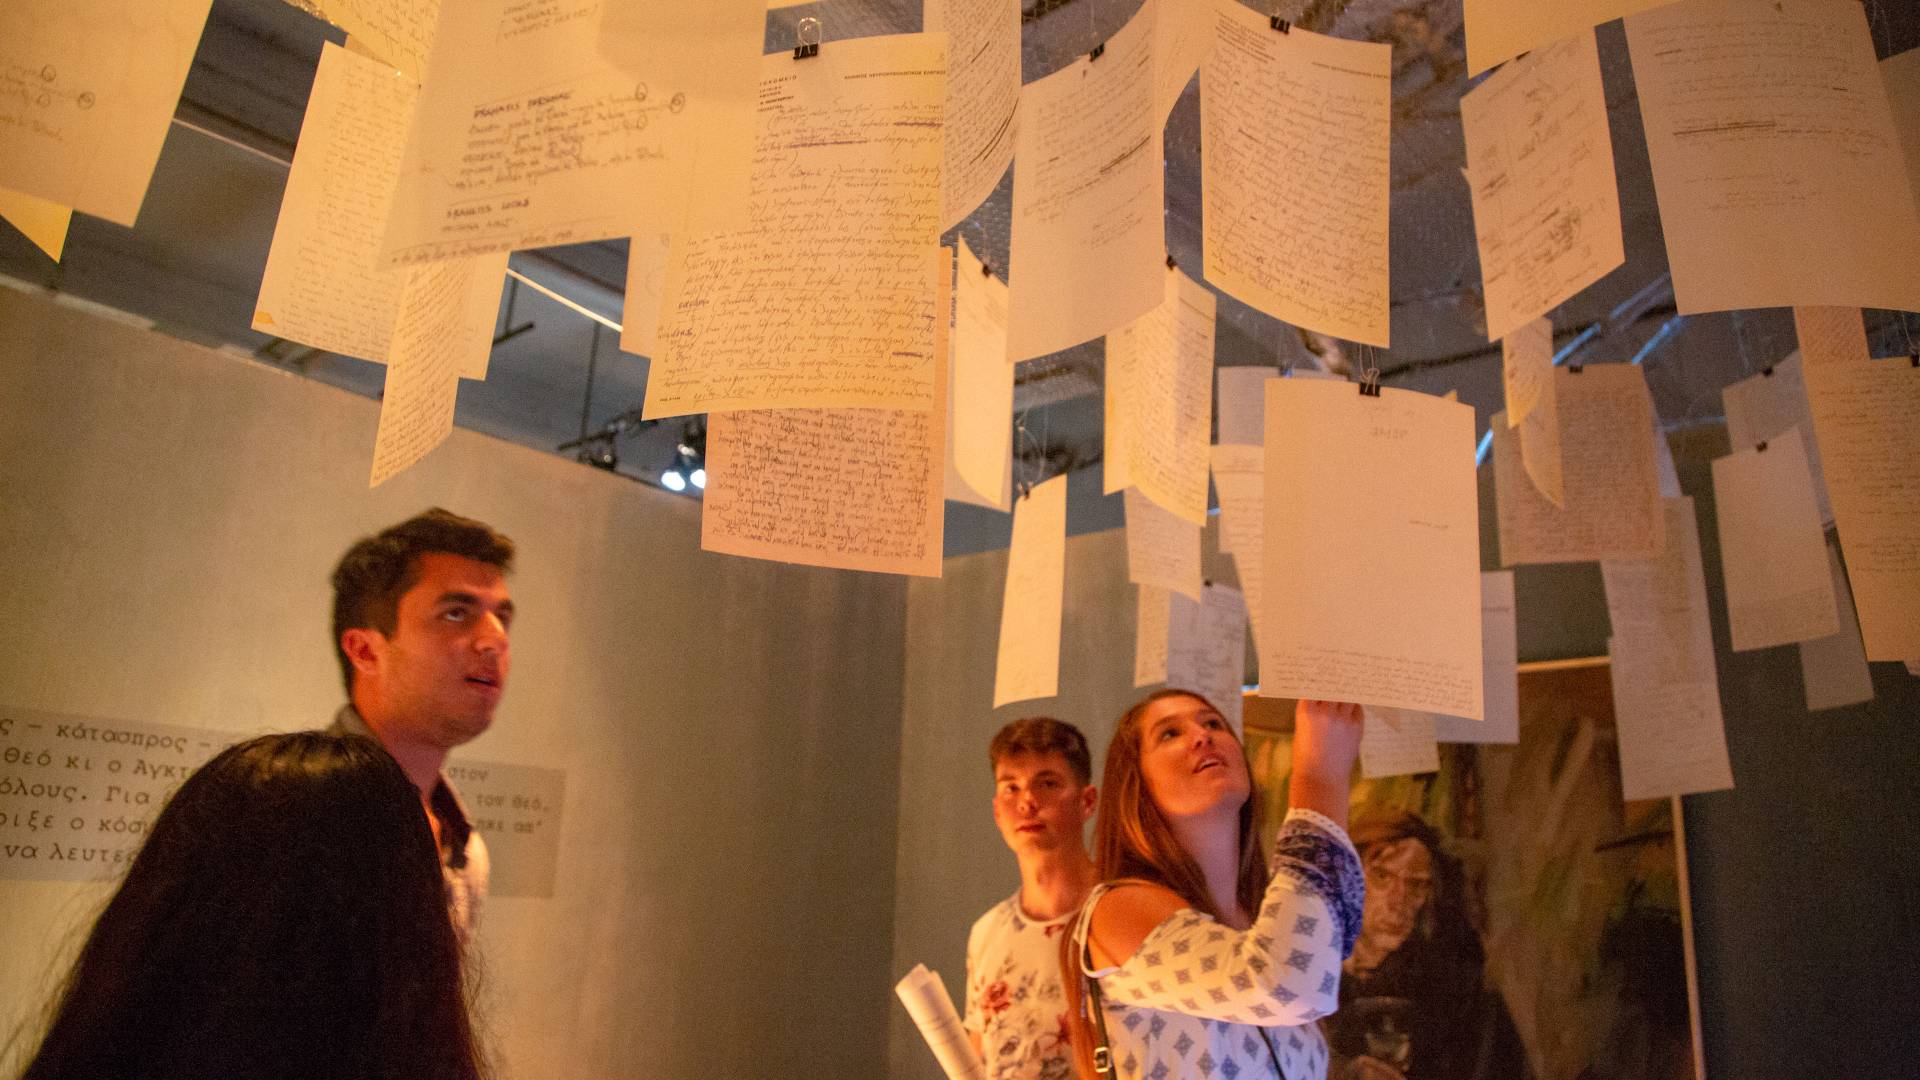 Students looking at art installation in Athens, Greece